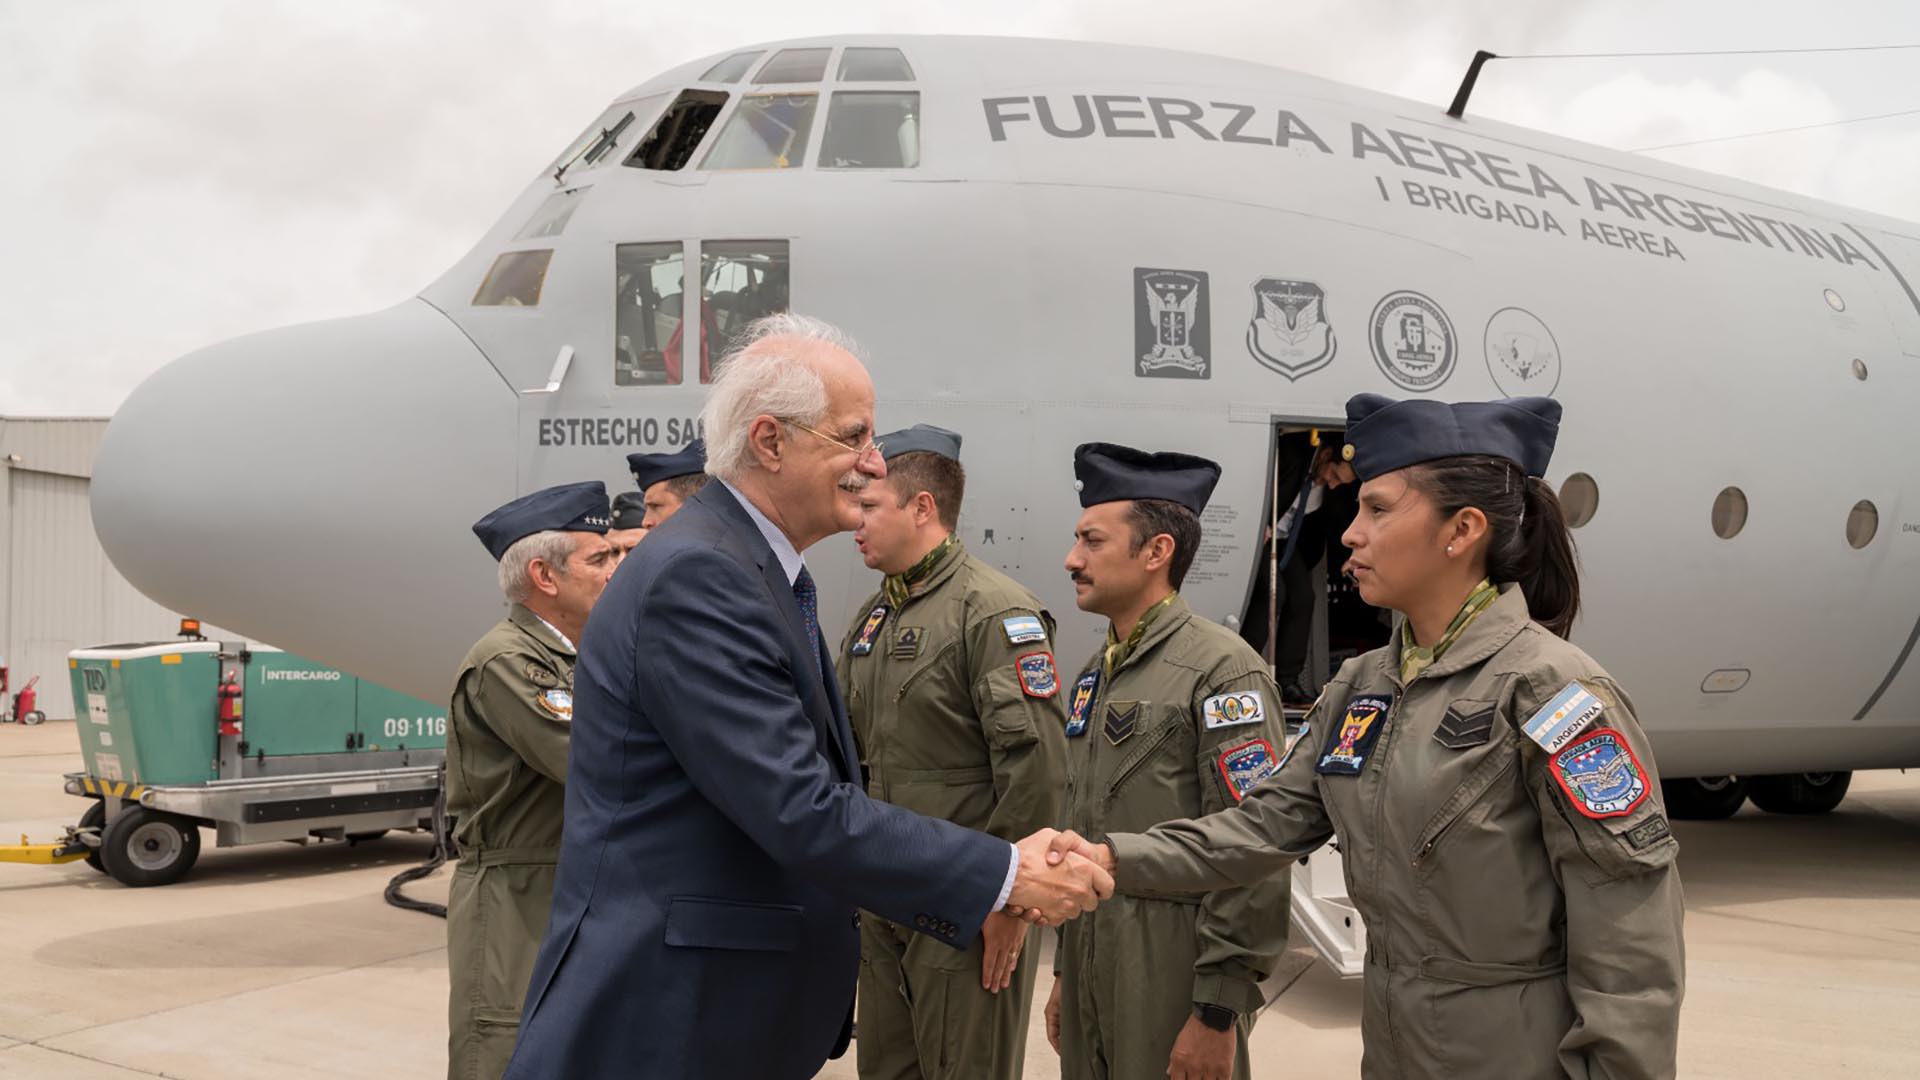 Jorge Taiana was accompanied by the head of the Argentine Air Force, Brigadier General Xavier Isaac